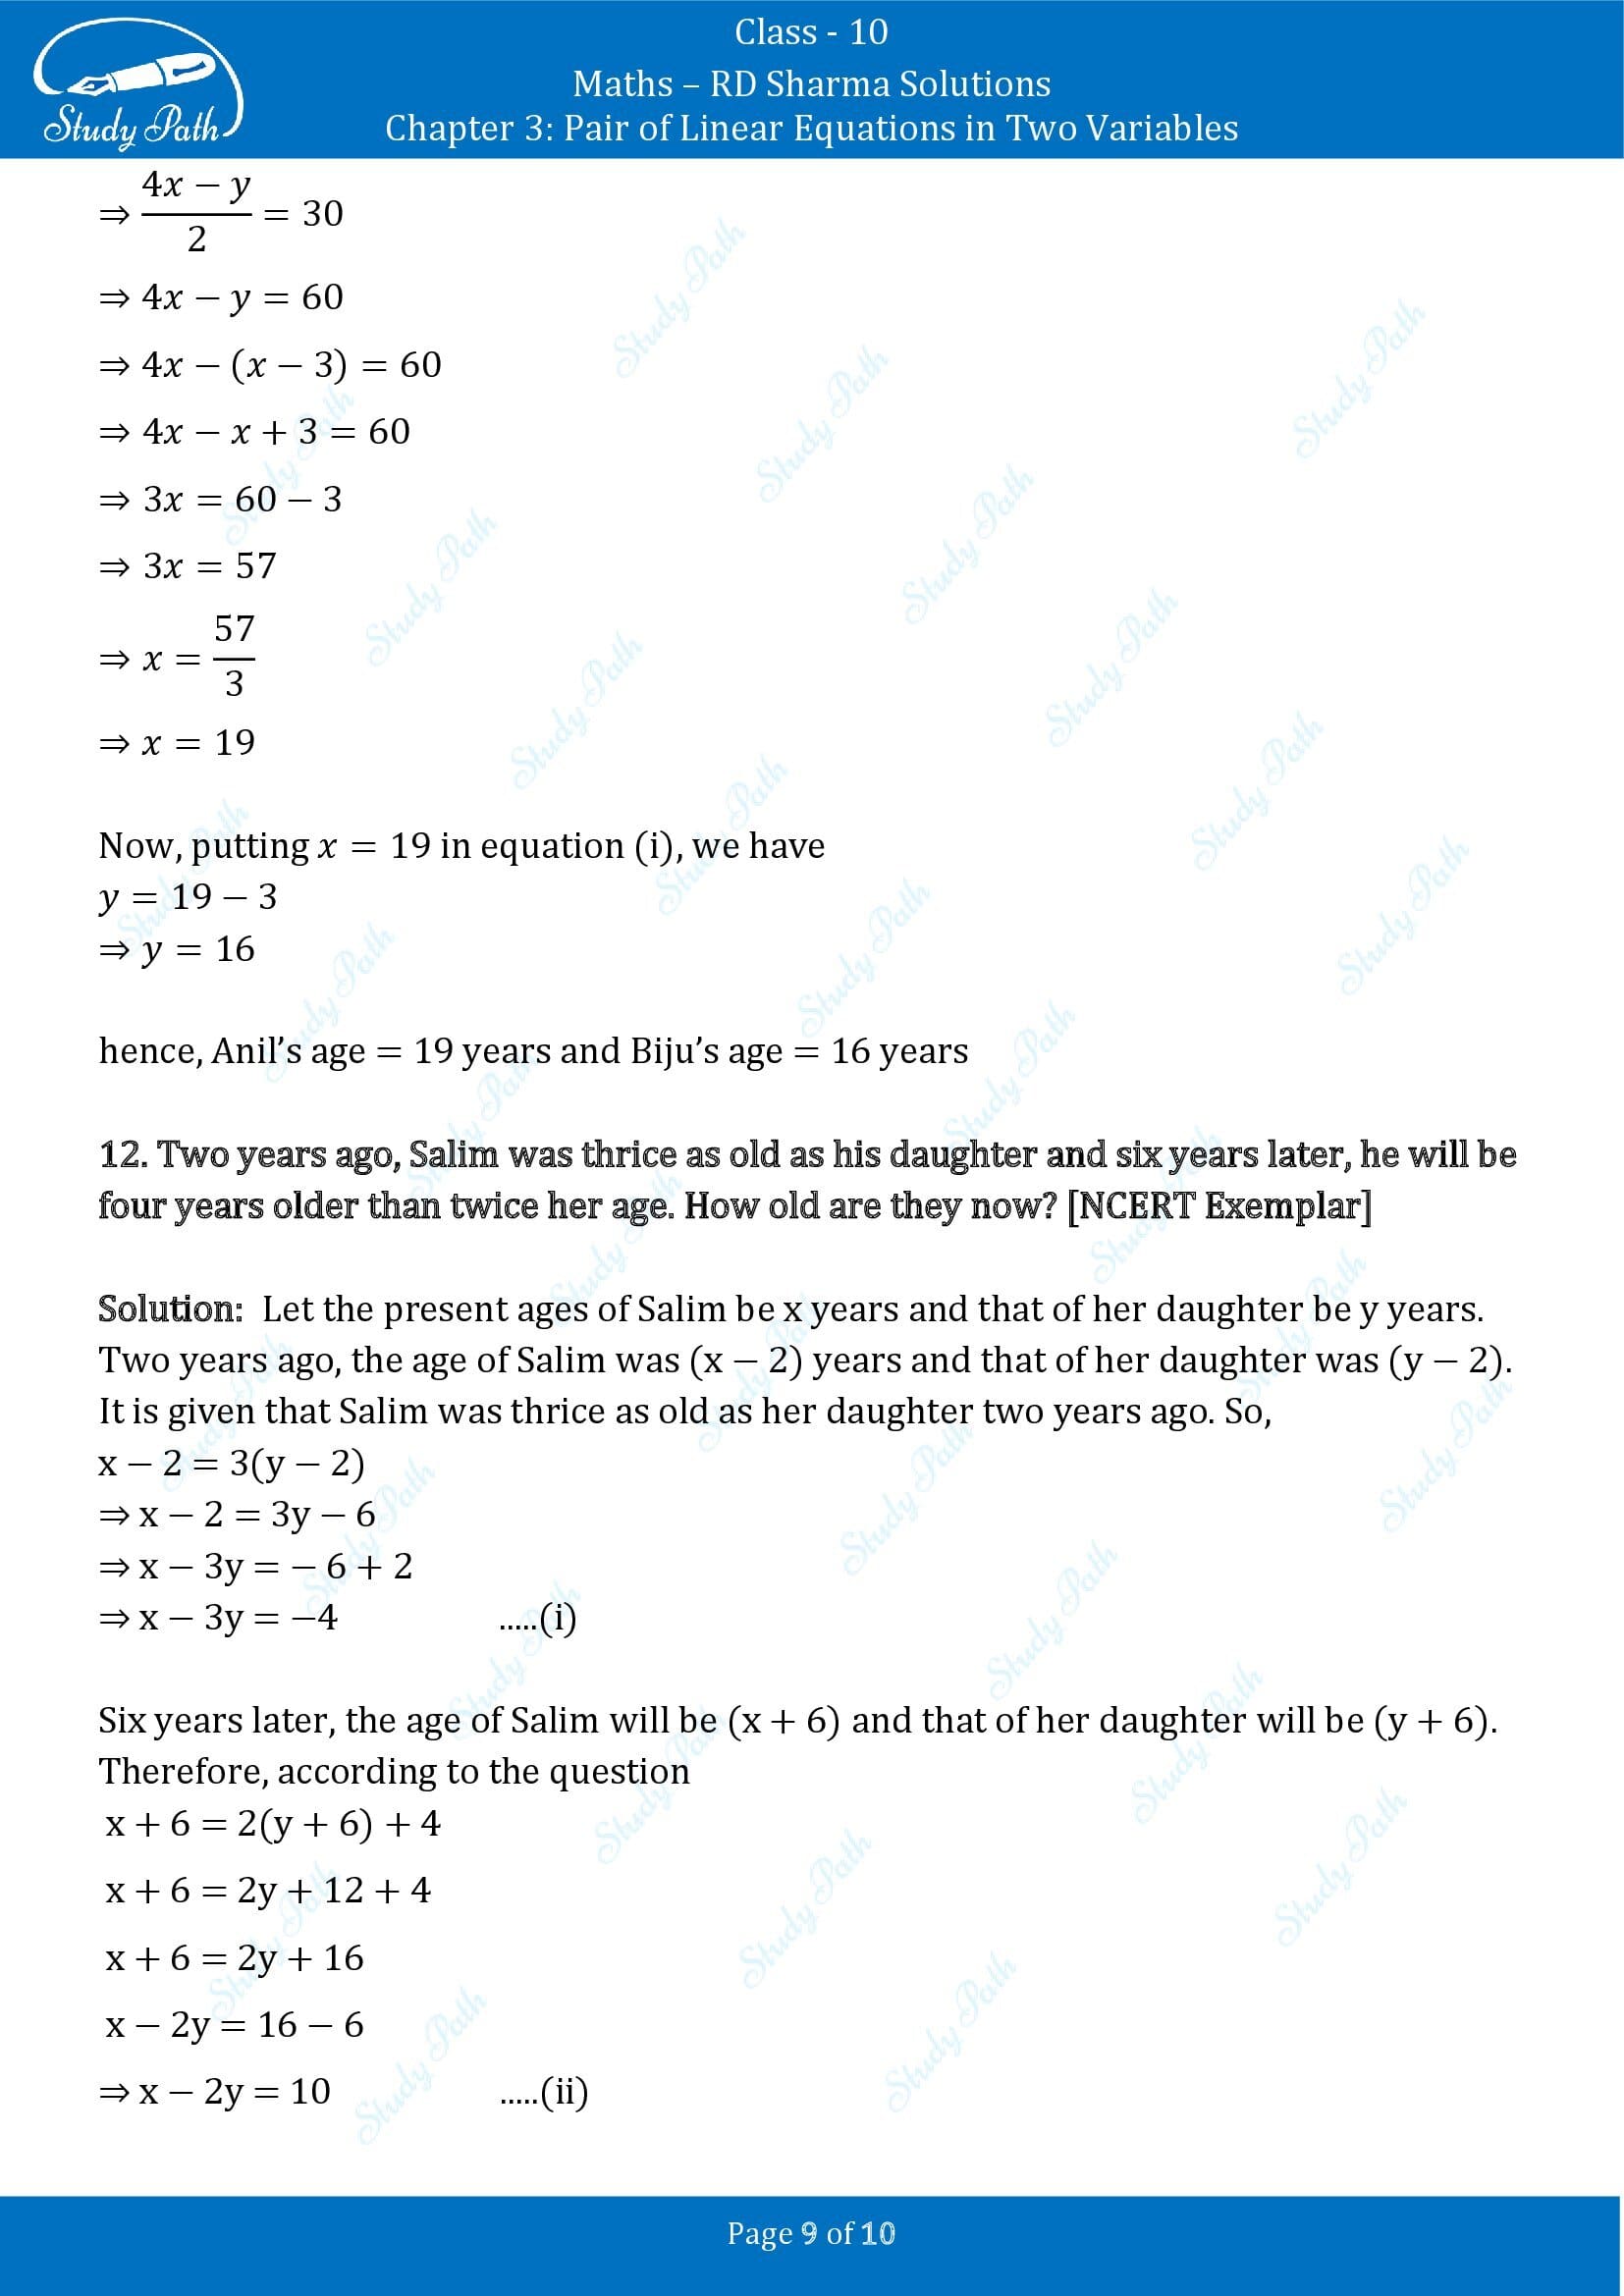 RD Sharma Solutions Class 10 Chapter 3 Pair of Linear Equations in Two Variables Exercise 3.9 00009